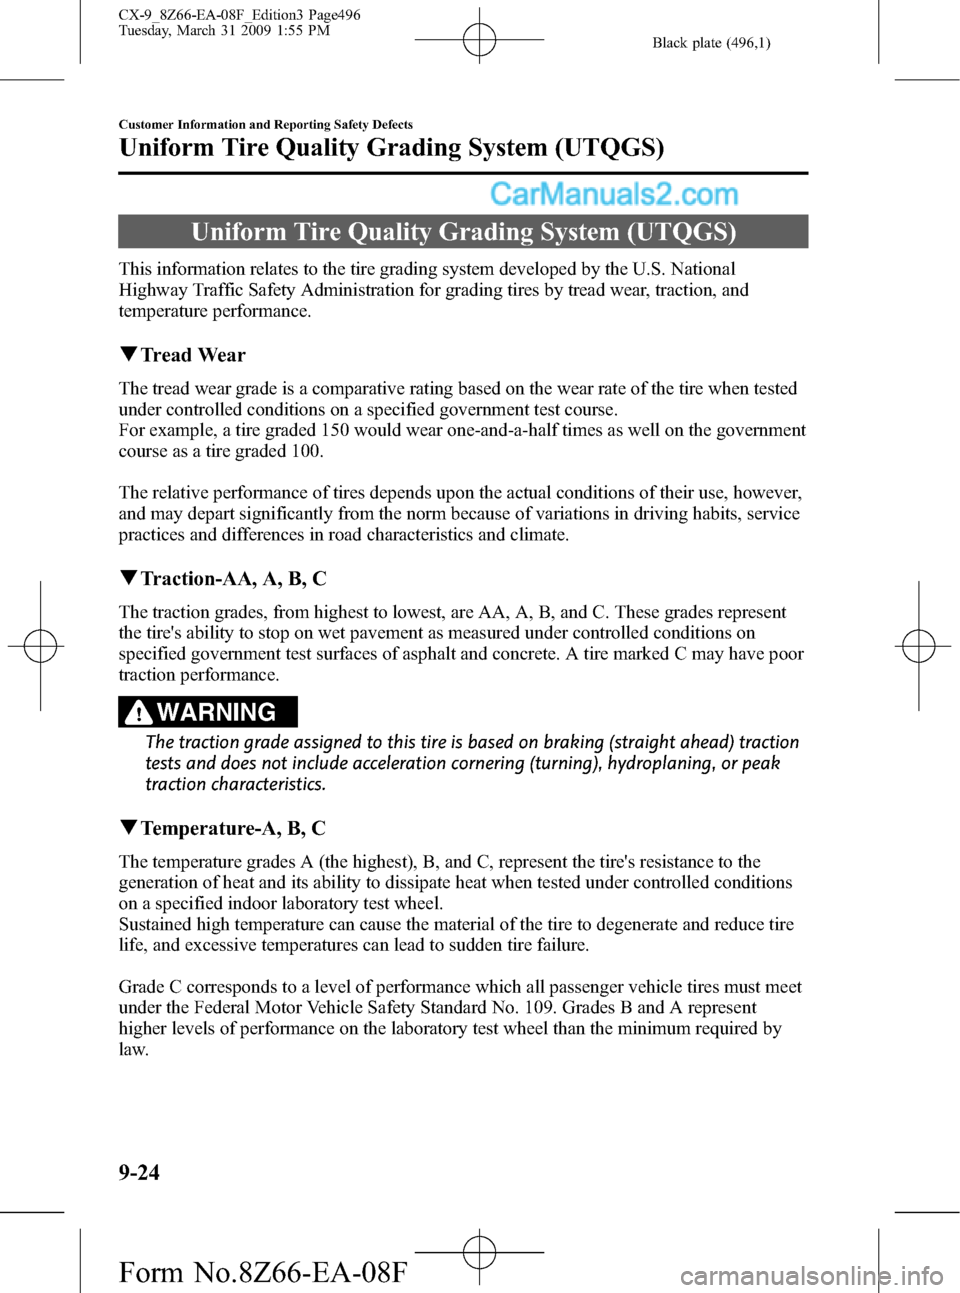 MAZDA MODEL CX-9 2009   (in English) Owners Guide Black plate (496,1)
Uniform Tire Quality Grading System (UTQGS)
This information relates to the tire grading system developed by the U.S. National
Highway Traffic Safety Administration for grading tir